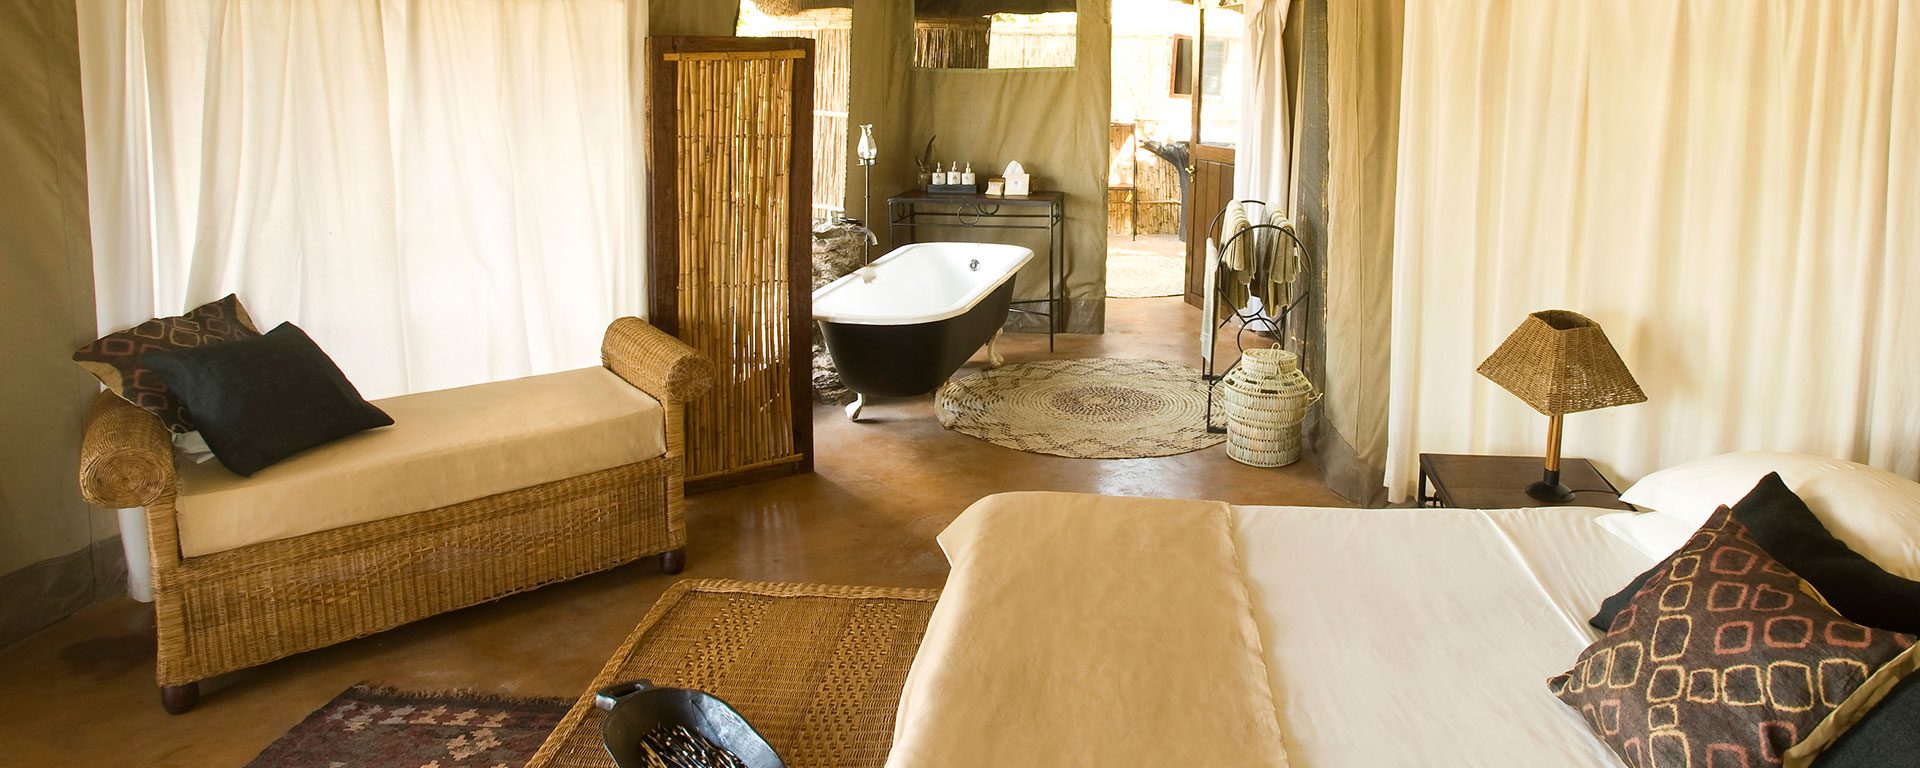 The spacious and luxurious tents at Mchenja Camp have open-air bath tubs and showers that look out over the river.